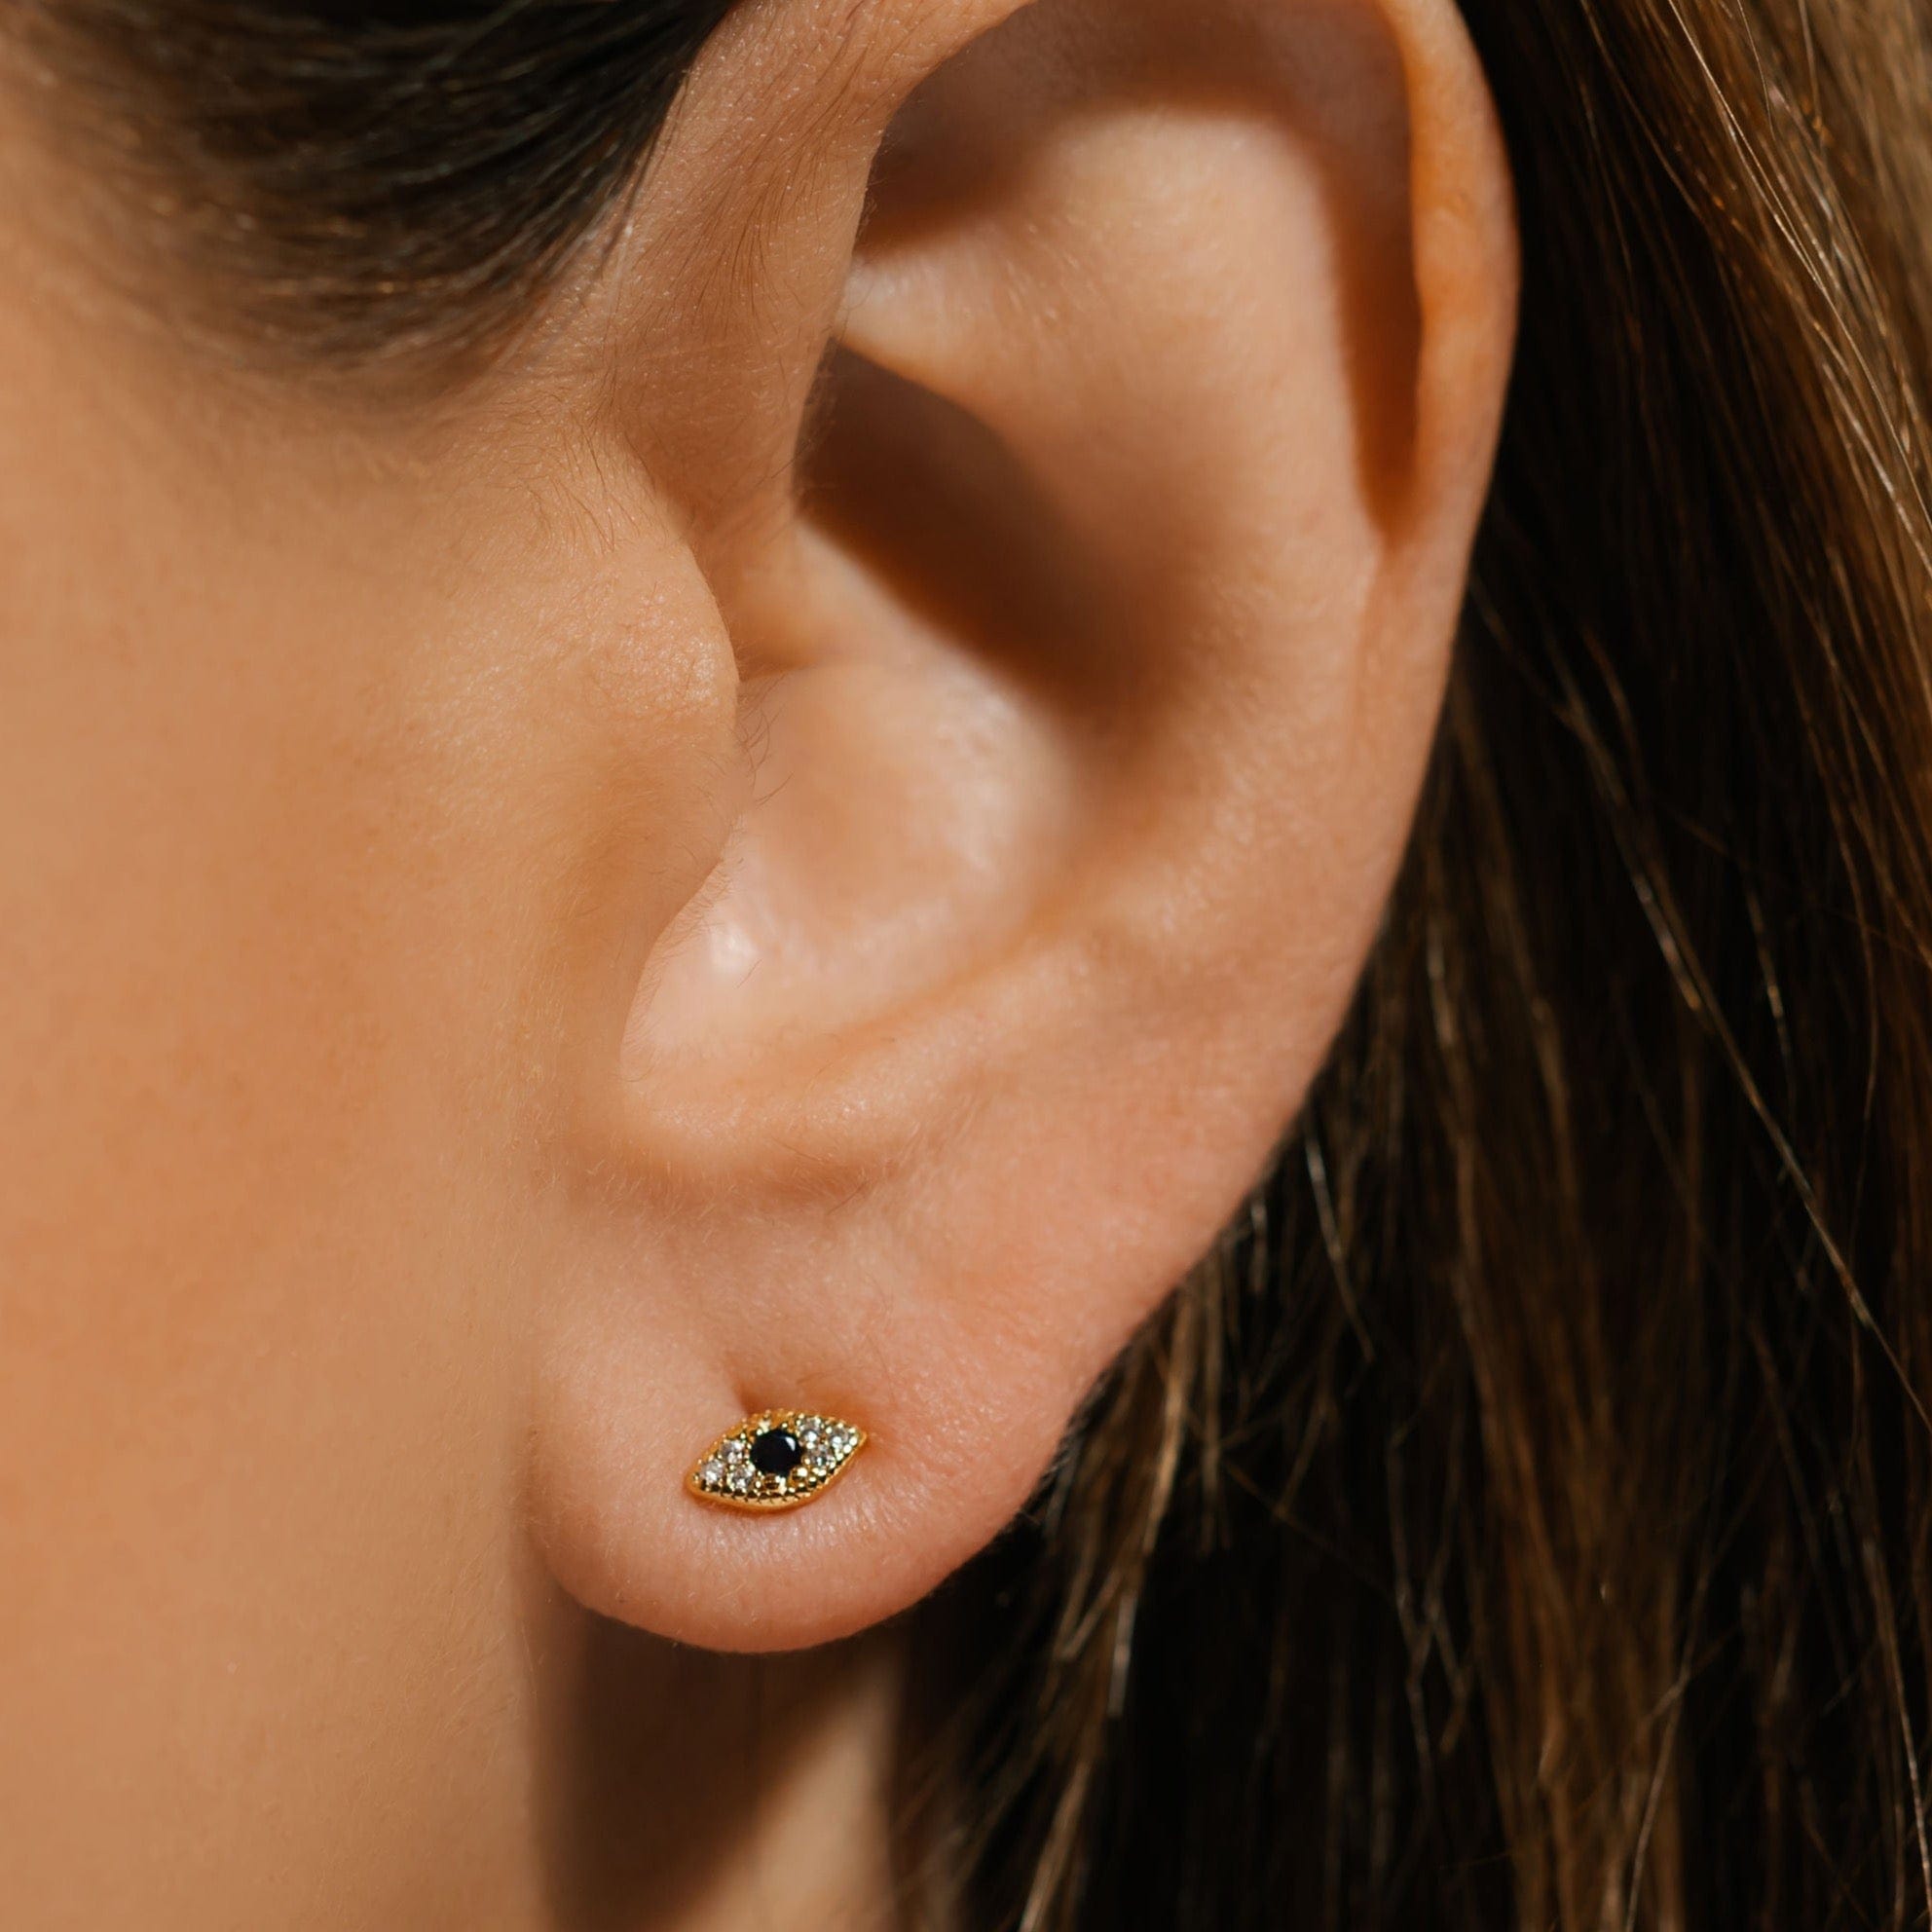 Dainty, yet eye-catching, the Evil Eye Cristallo Stud Mini adds a stunningly ominous accent to the model's ear. 